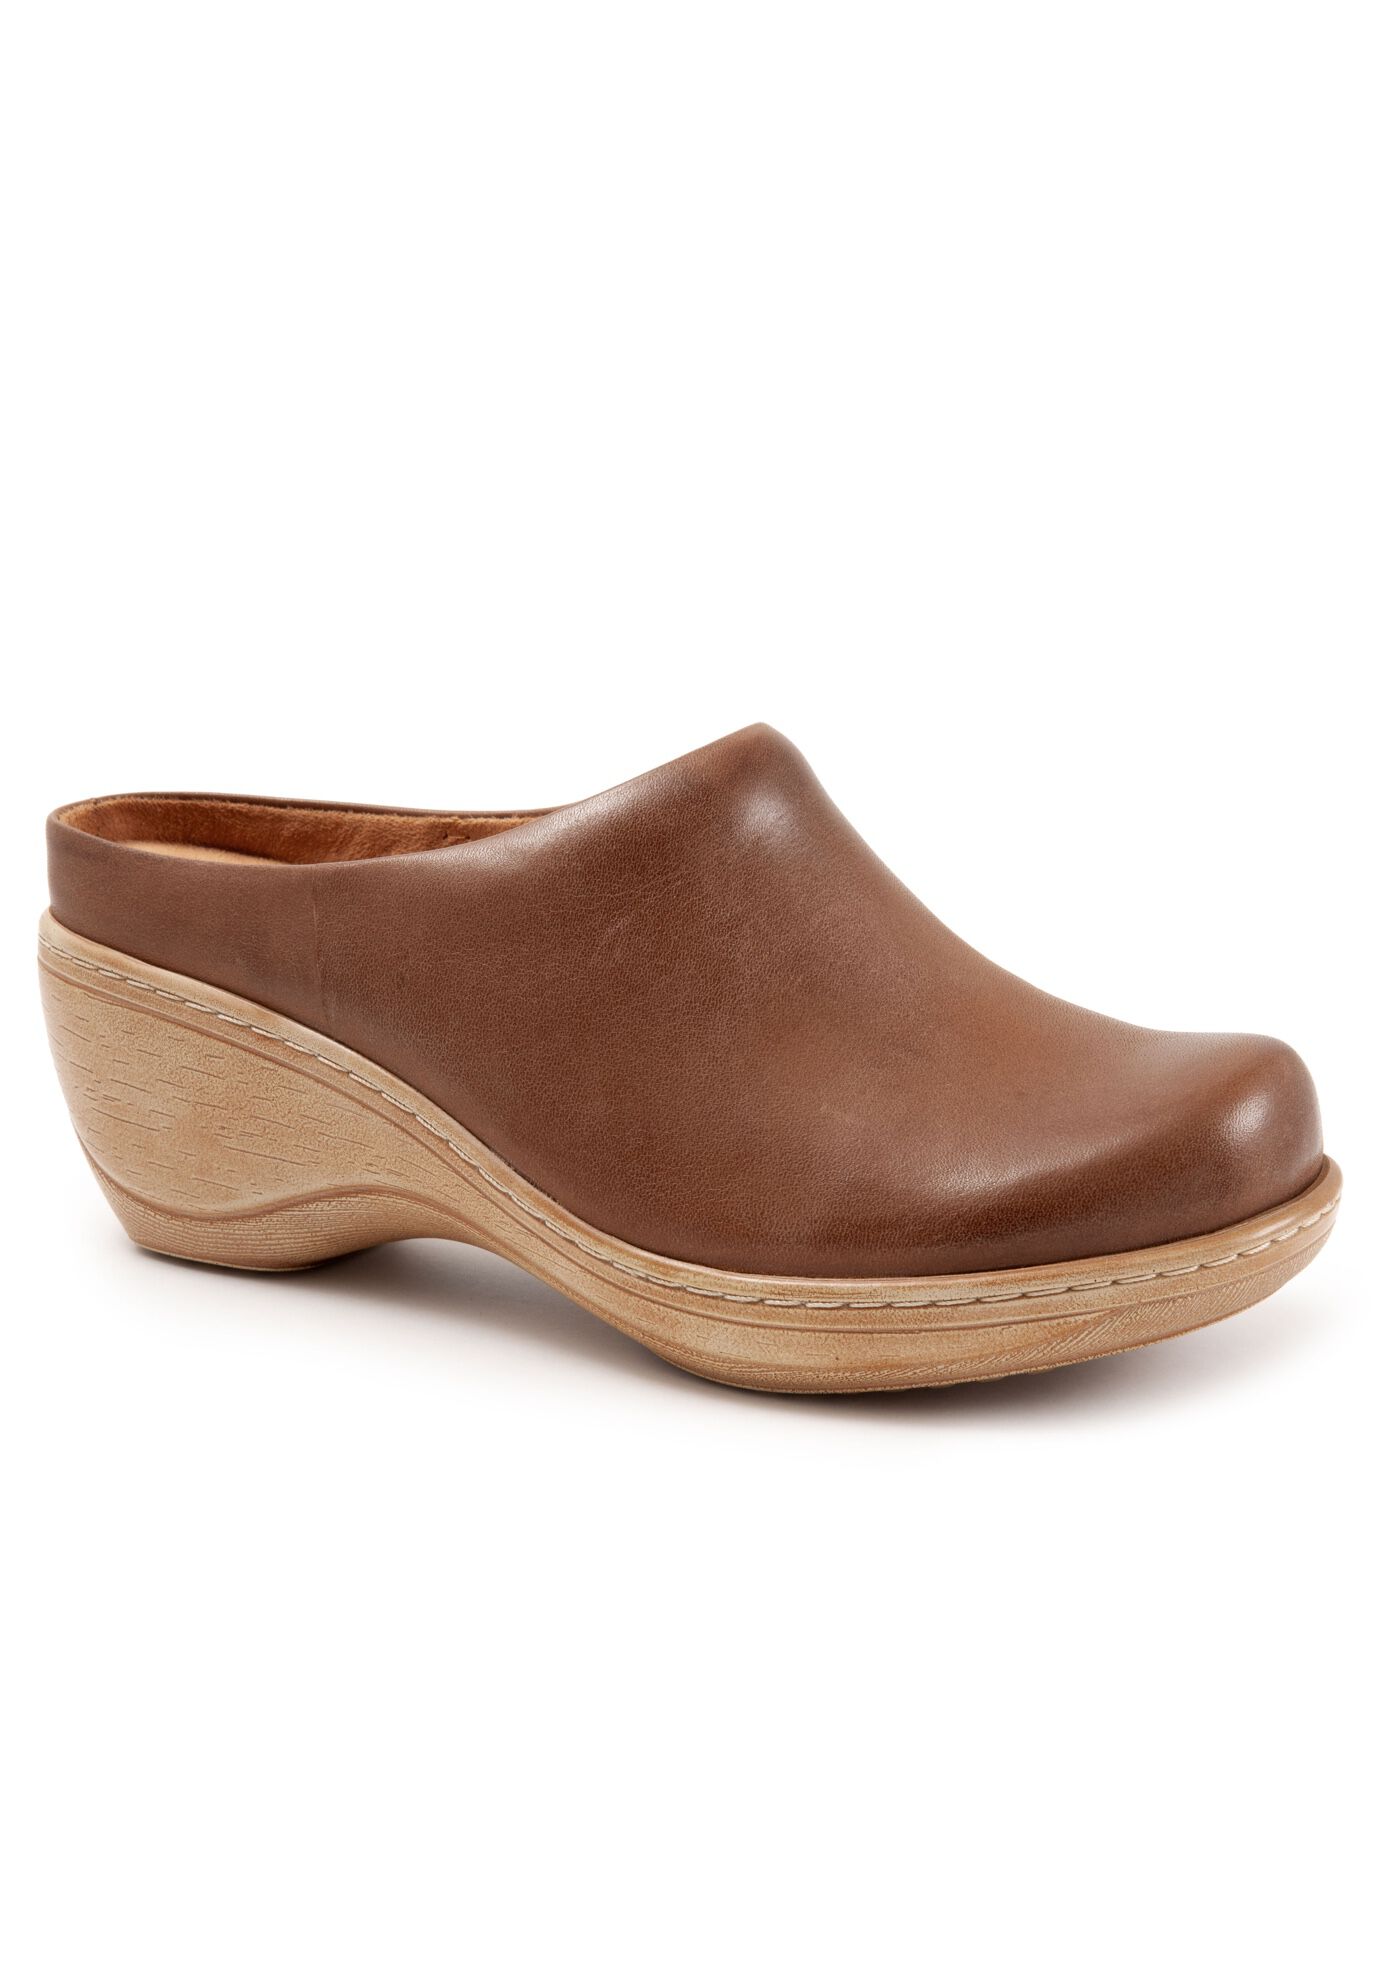 Extra Wide Width Women's Madison Clog by SoftWalk in Saddle (Size 7 WW)